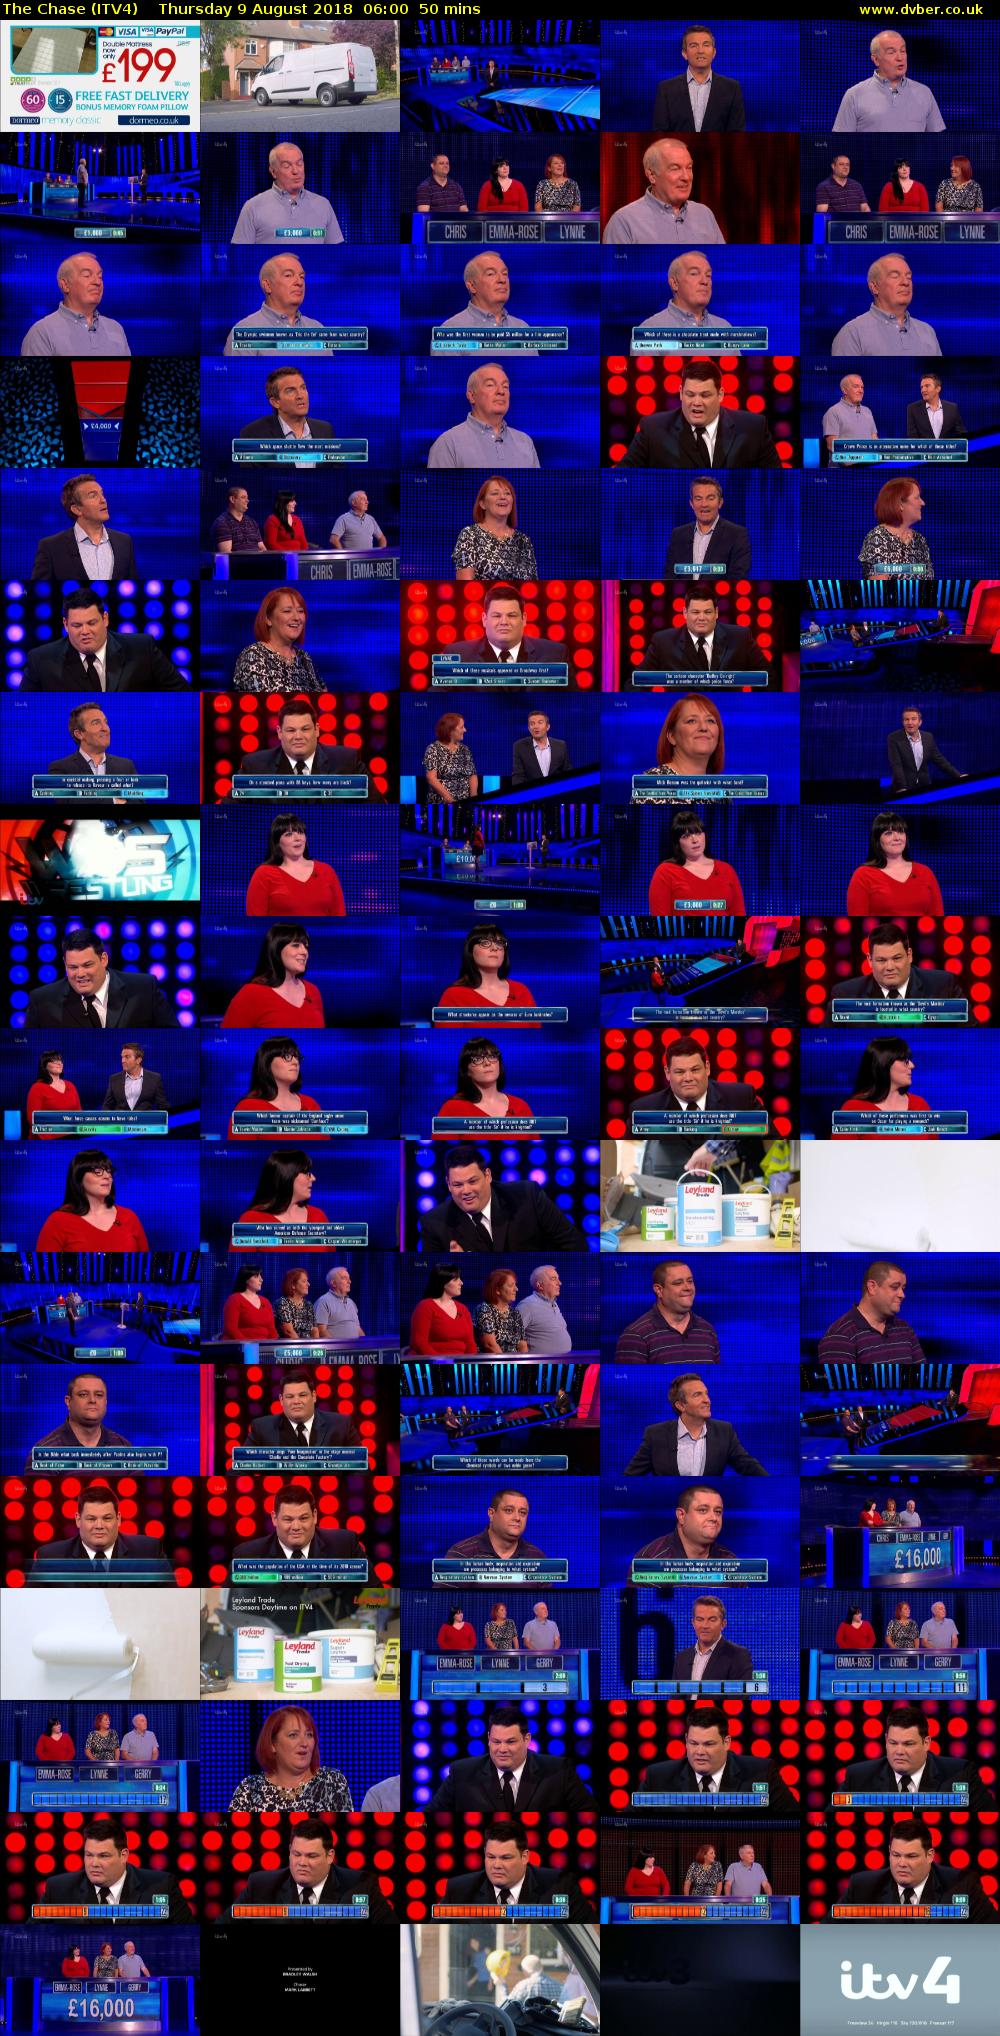 The Chase (ITV4) Thursday 9 August 2018 06:00 - 06:50